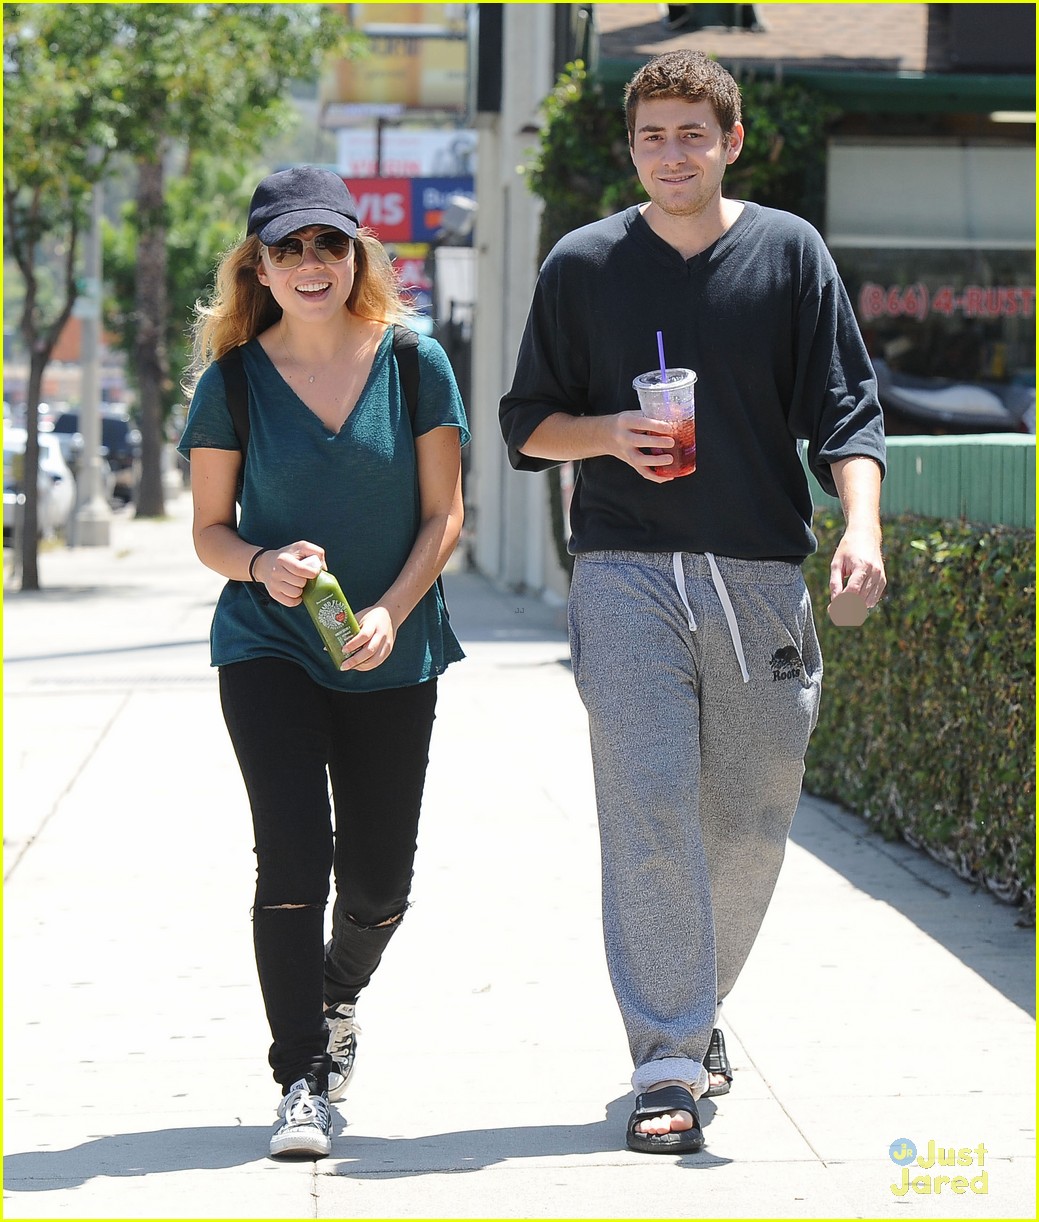 Jennette McCurdy Spends Time With 'Between' Co-Star Jesse Carere ...